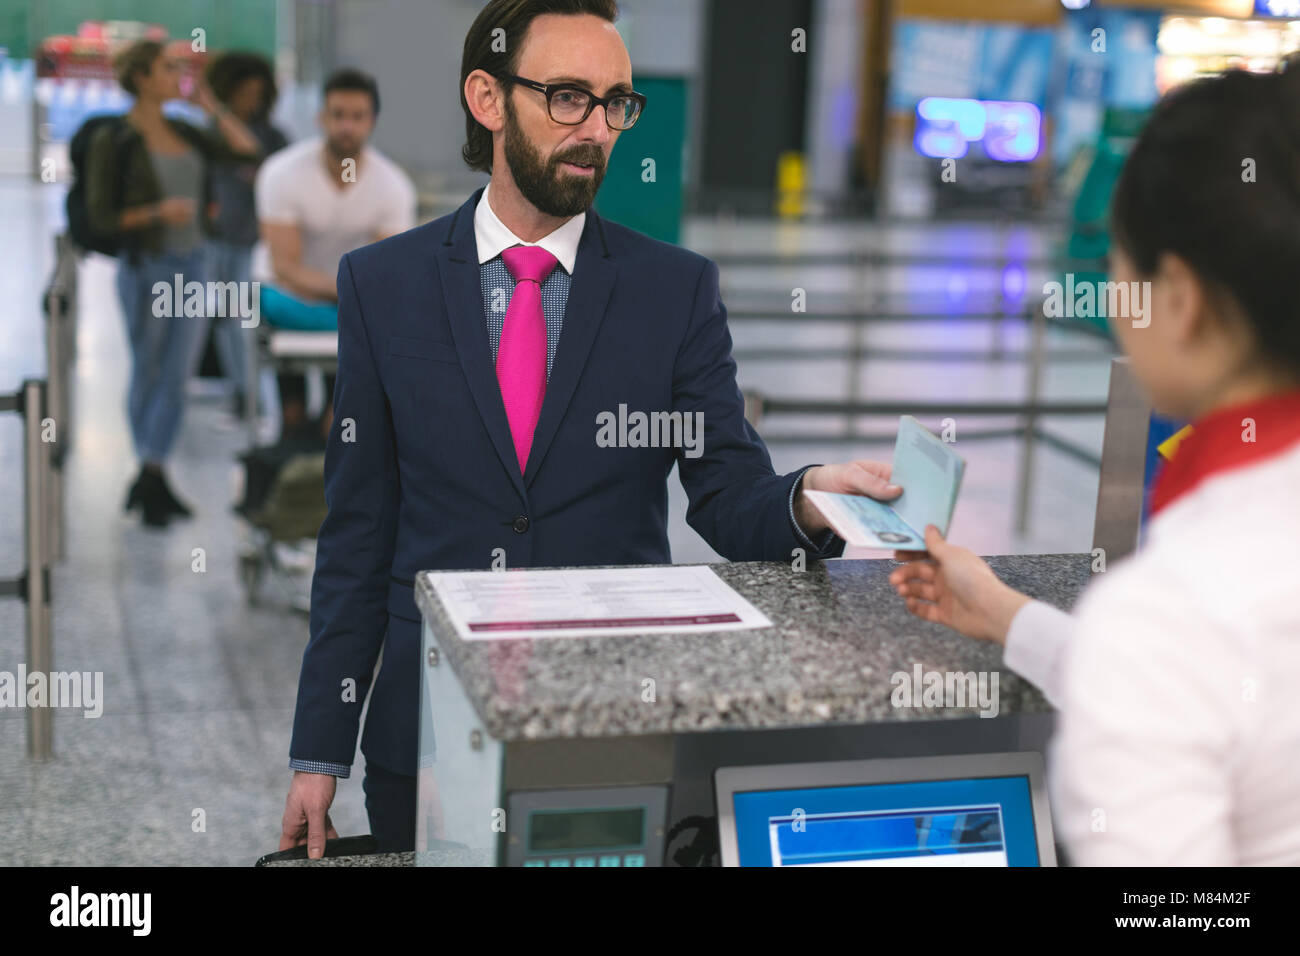 Airline check-in attendant handing passport to commuter Stock Photo